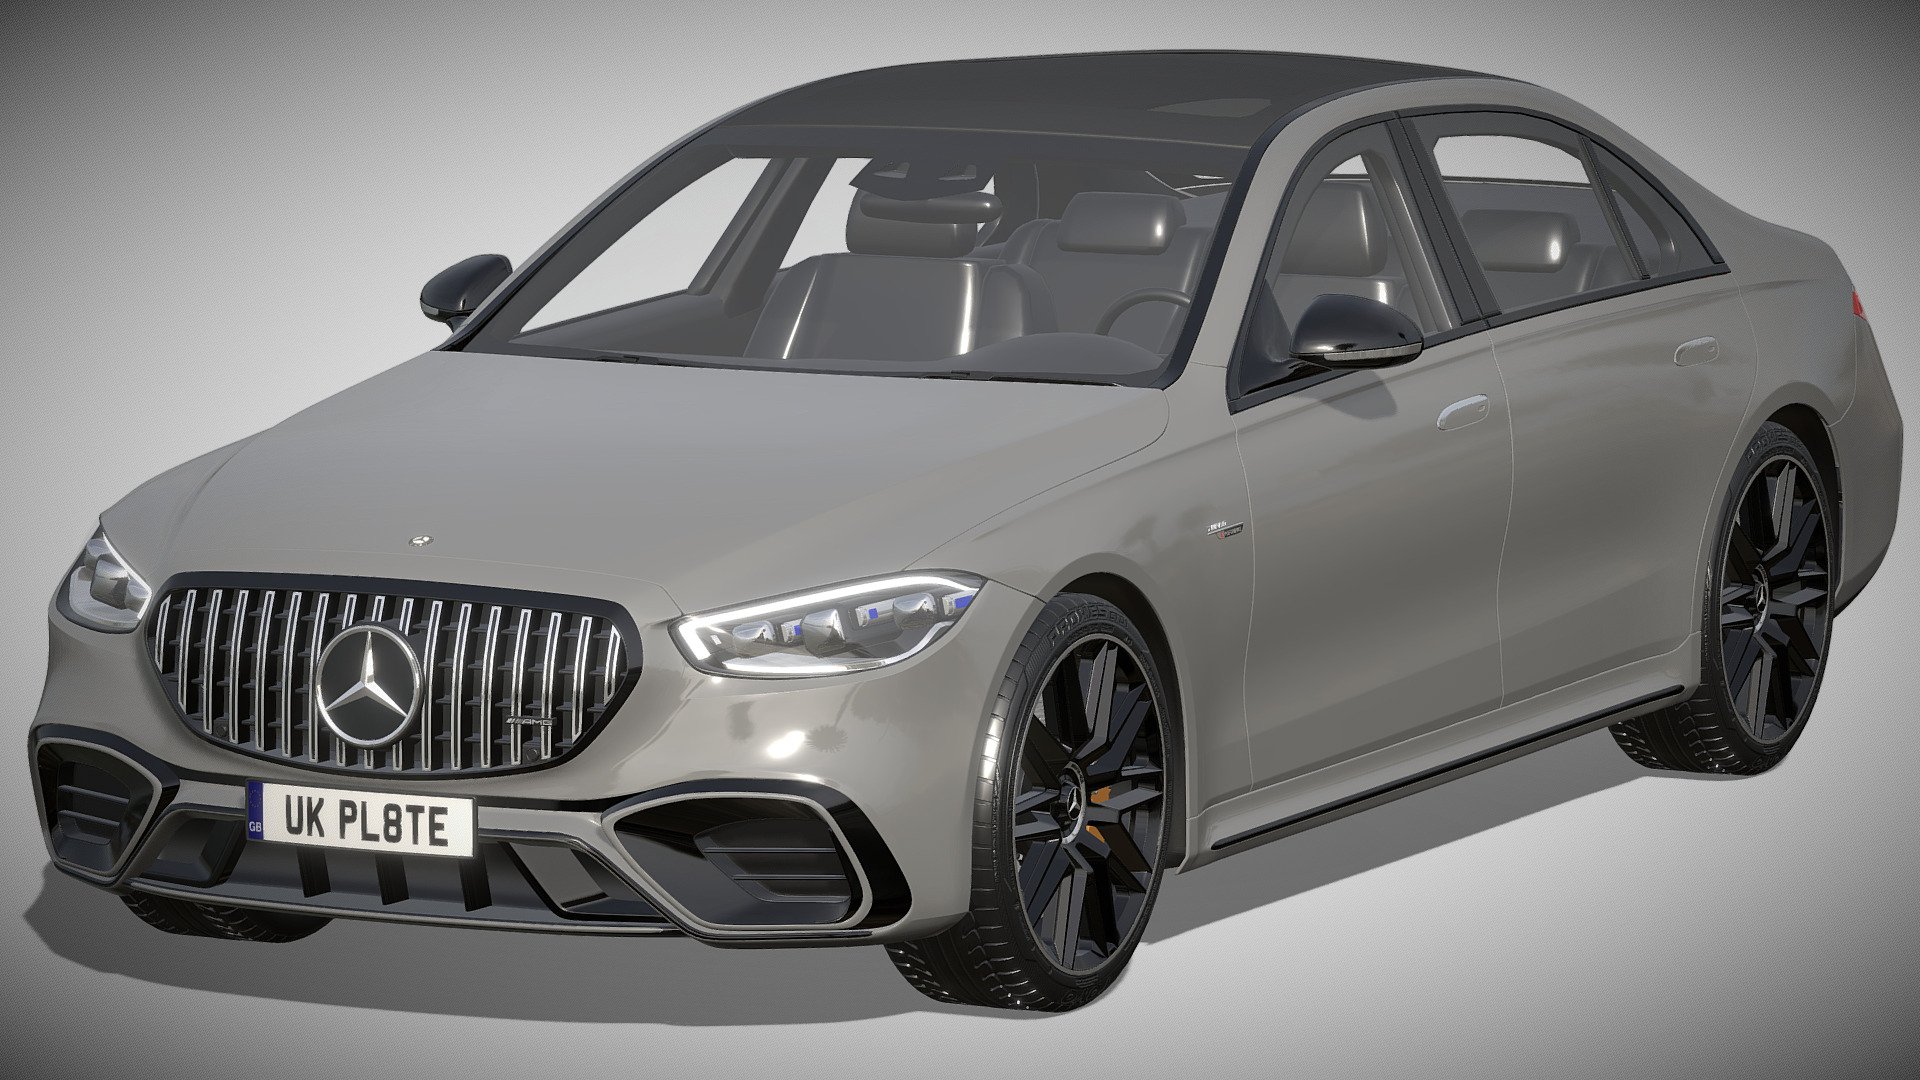 Mercedes-Benz S63 AMG E Performance 2023

https://www.mercedes-benz.de/passengercars/models/saloon/s-class/amg-new.html

Clean geometry Light weight model, yet completely detailed for HI-Res renders. Use for movies, Advertisements or games

Corona render and materials

All textures include in *.rar files

Lighting setup is not included in the file! - Mercedes-Benz S63 AMG E Performance 2023 - Buy Royalty Free 3D model by zifir3d 3d model